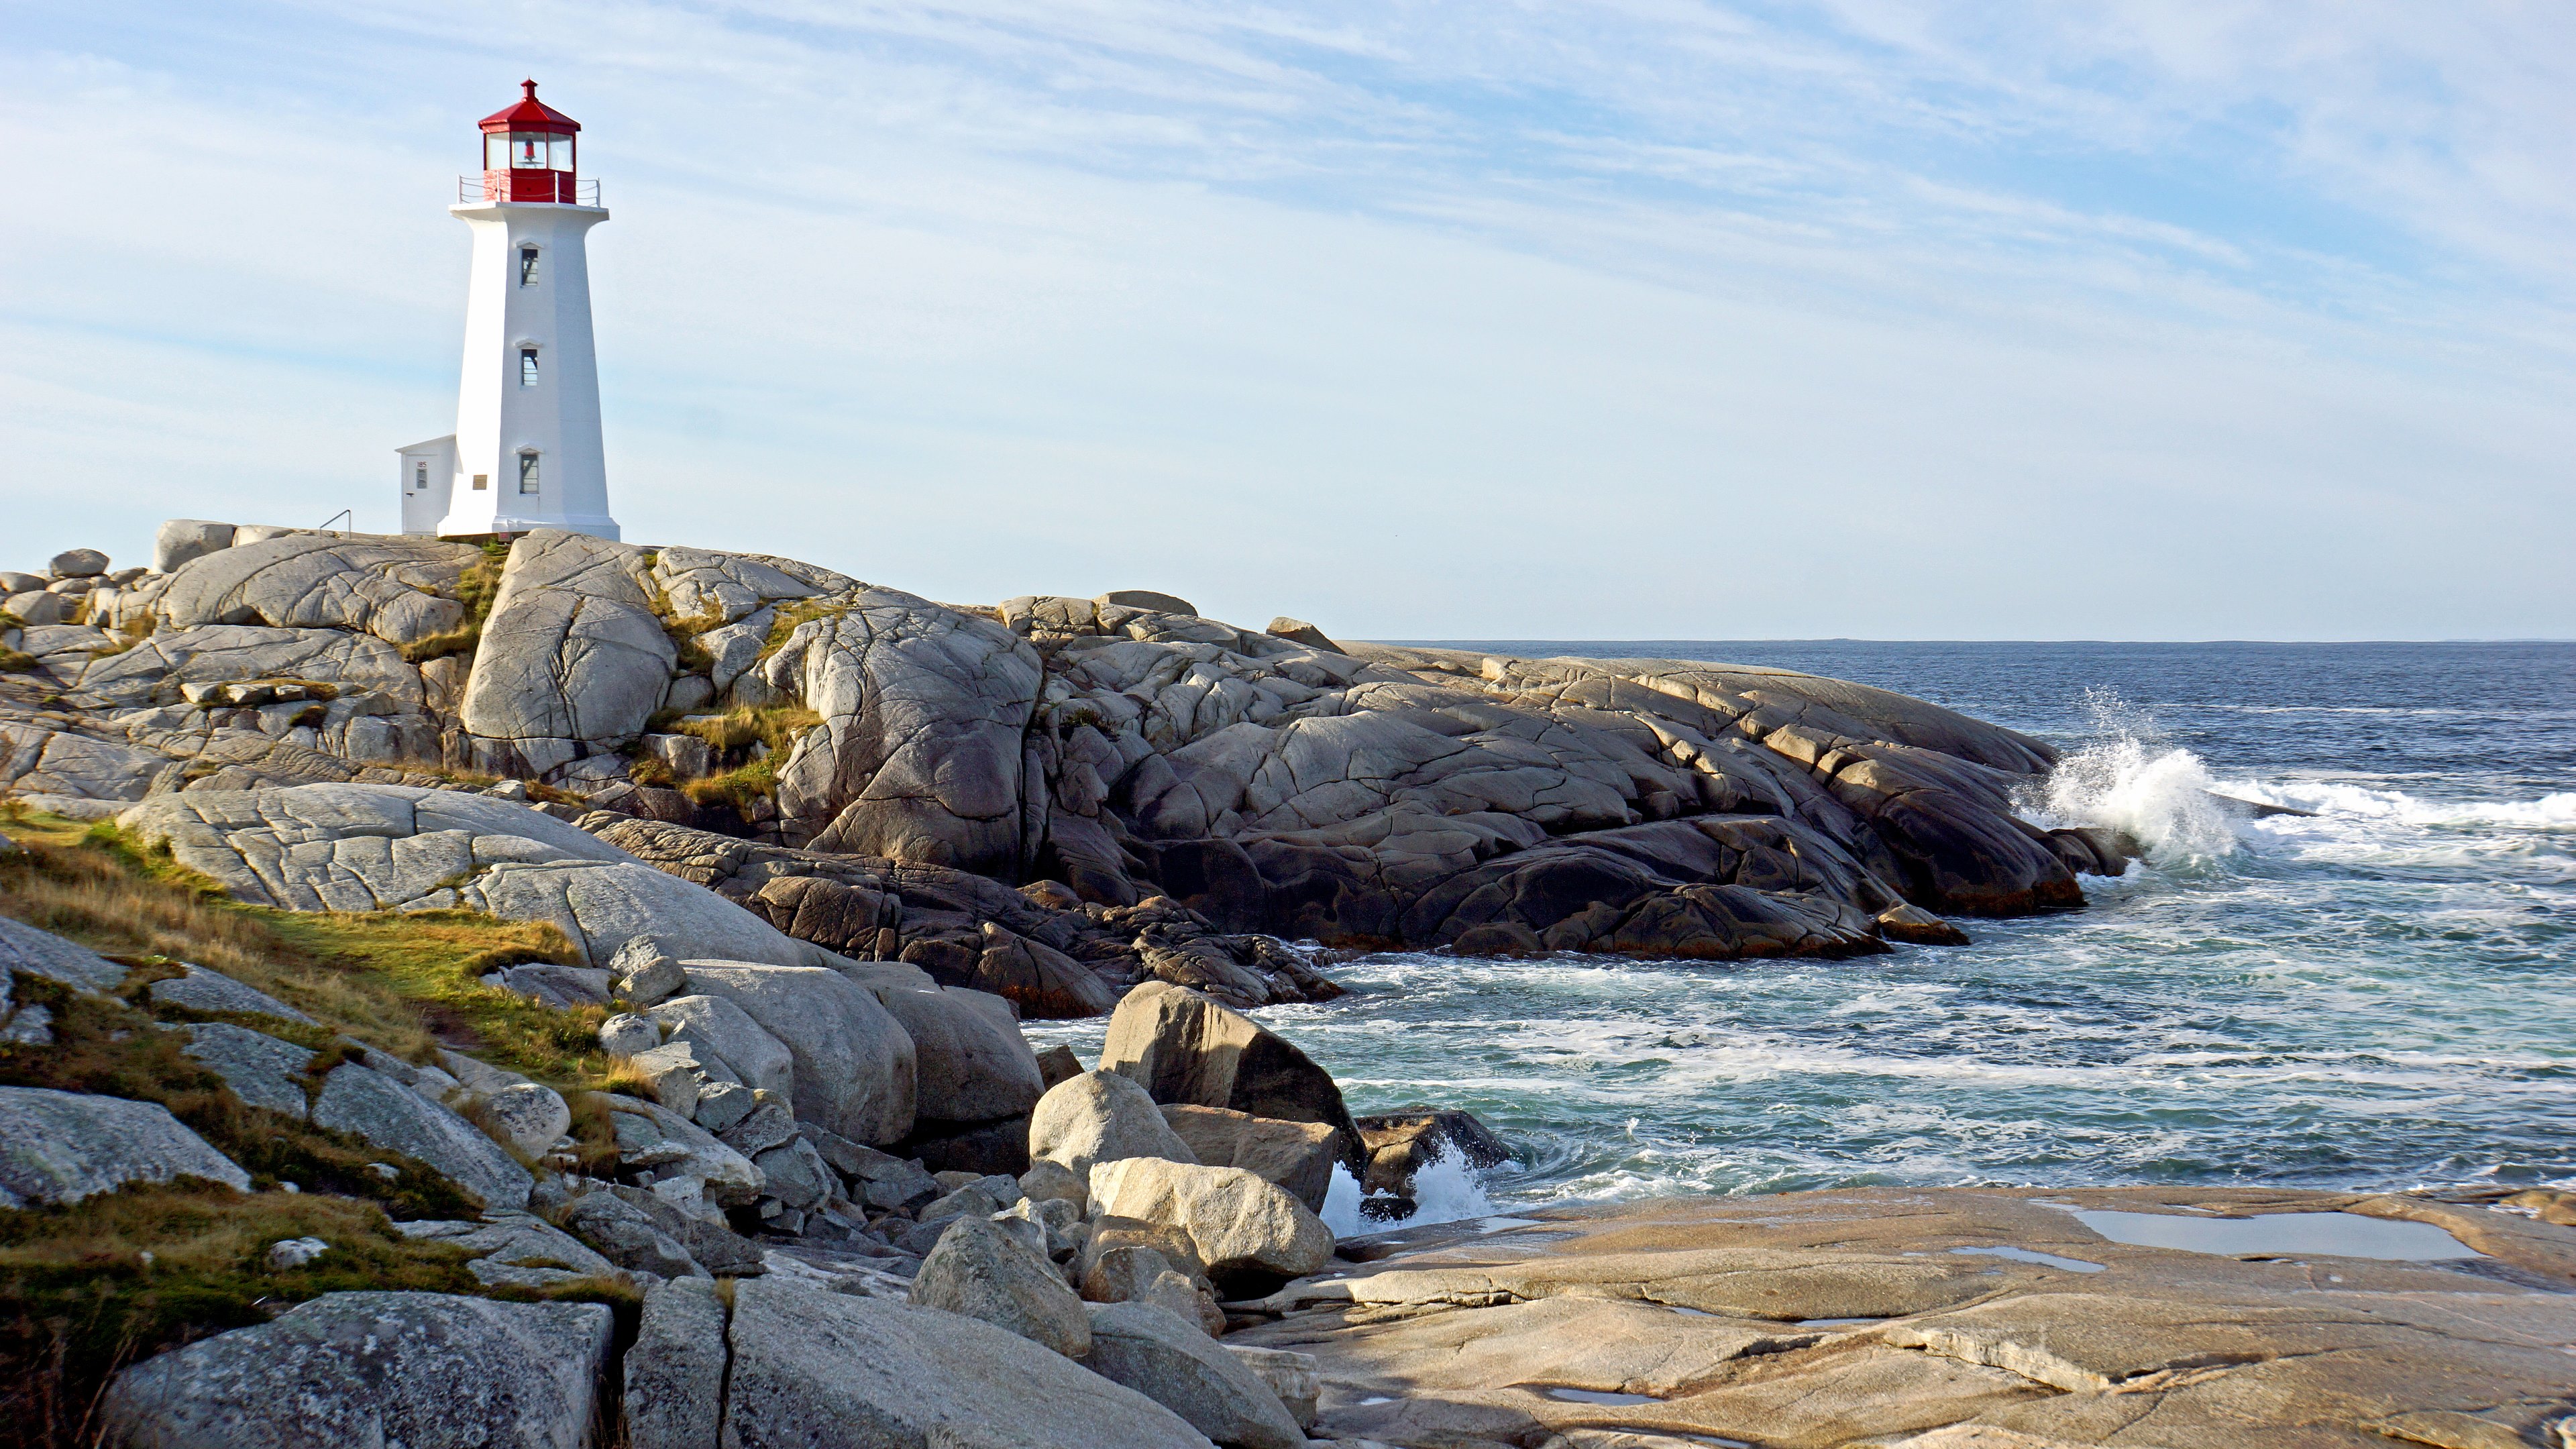 Wallpaper With The Lighthouse From Peggys Cove